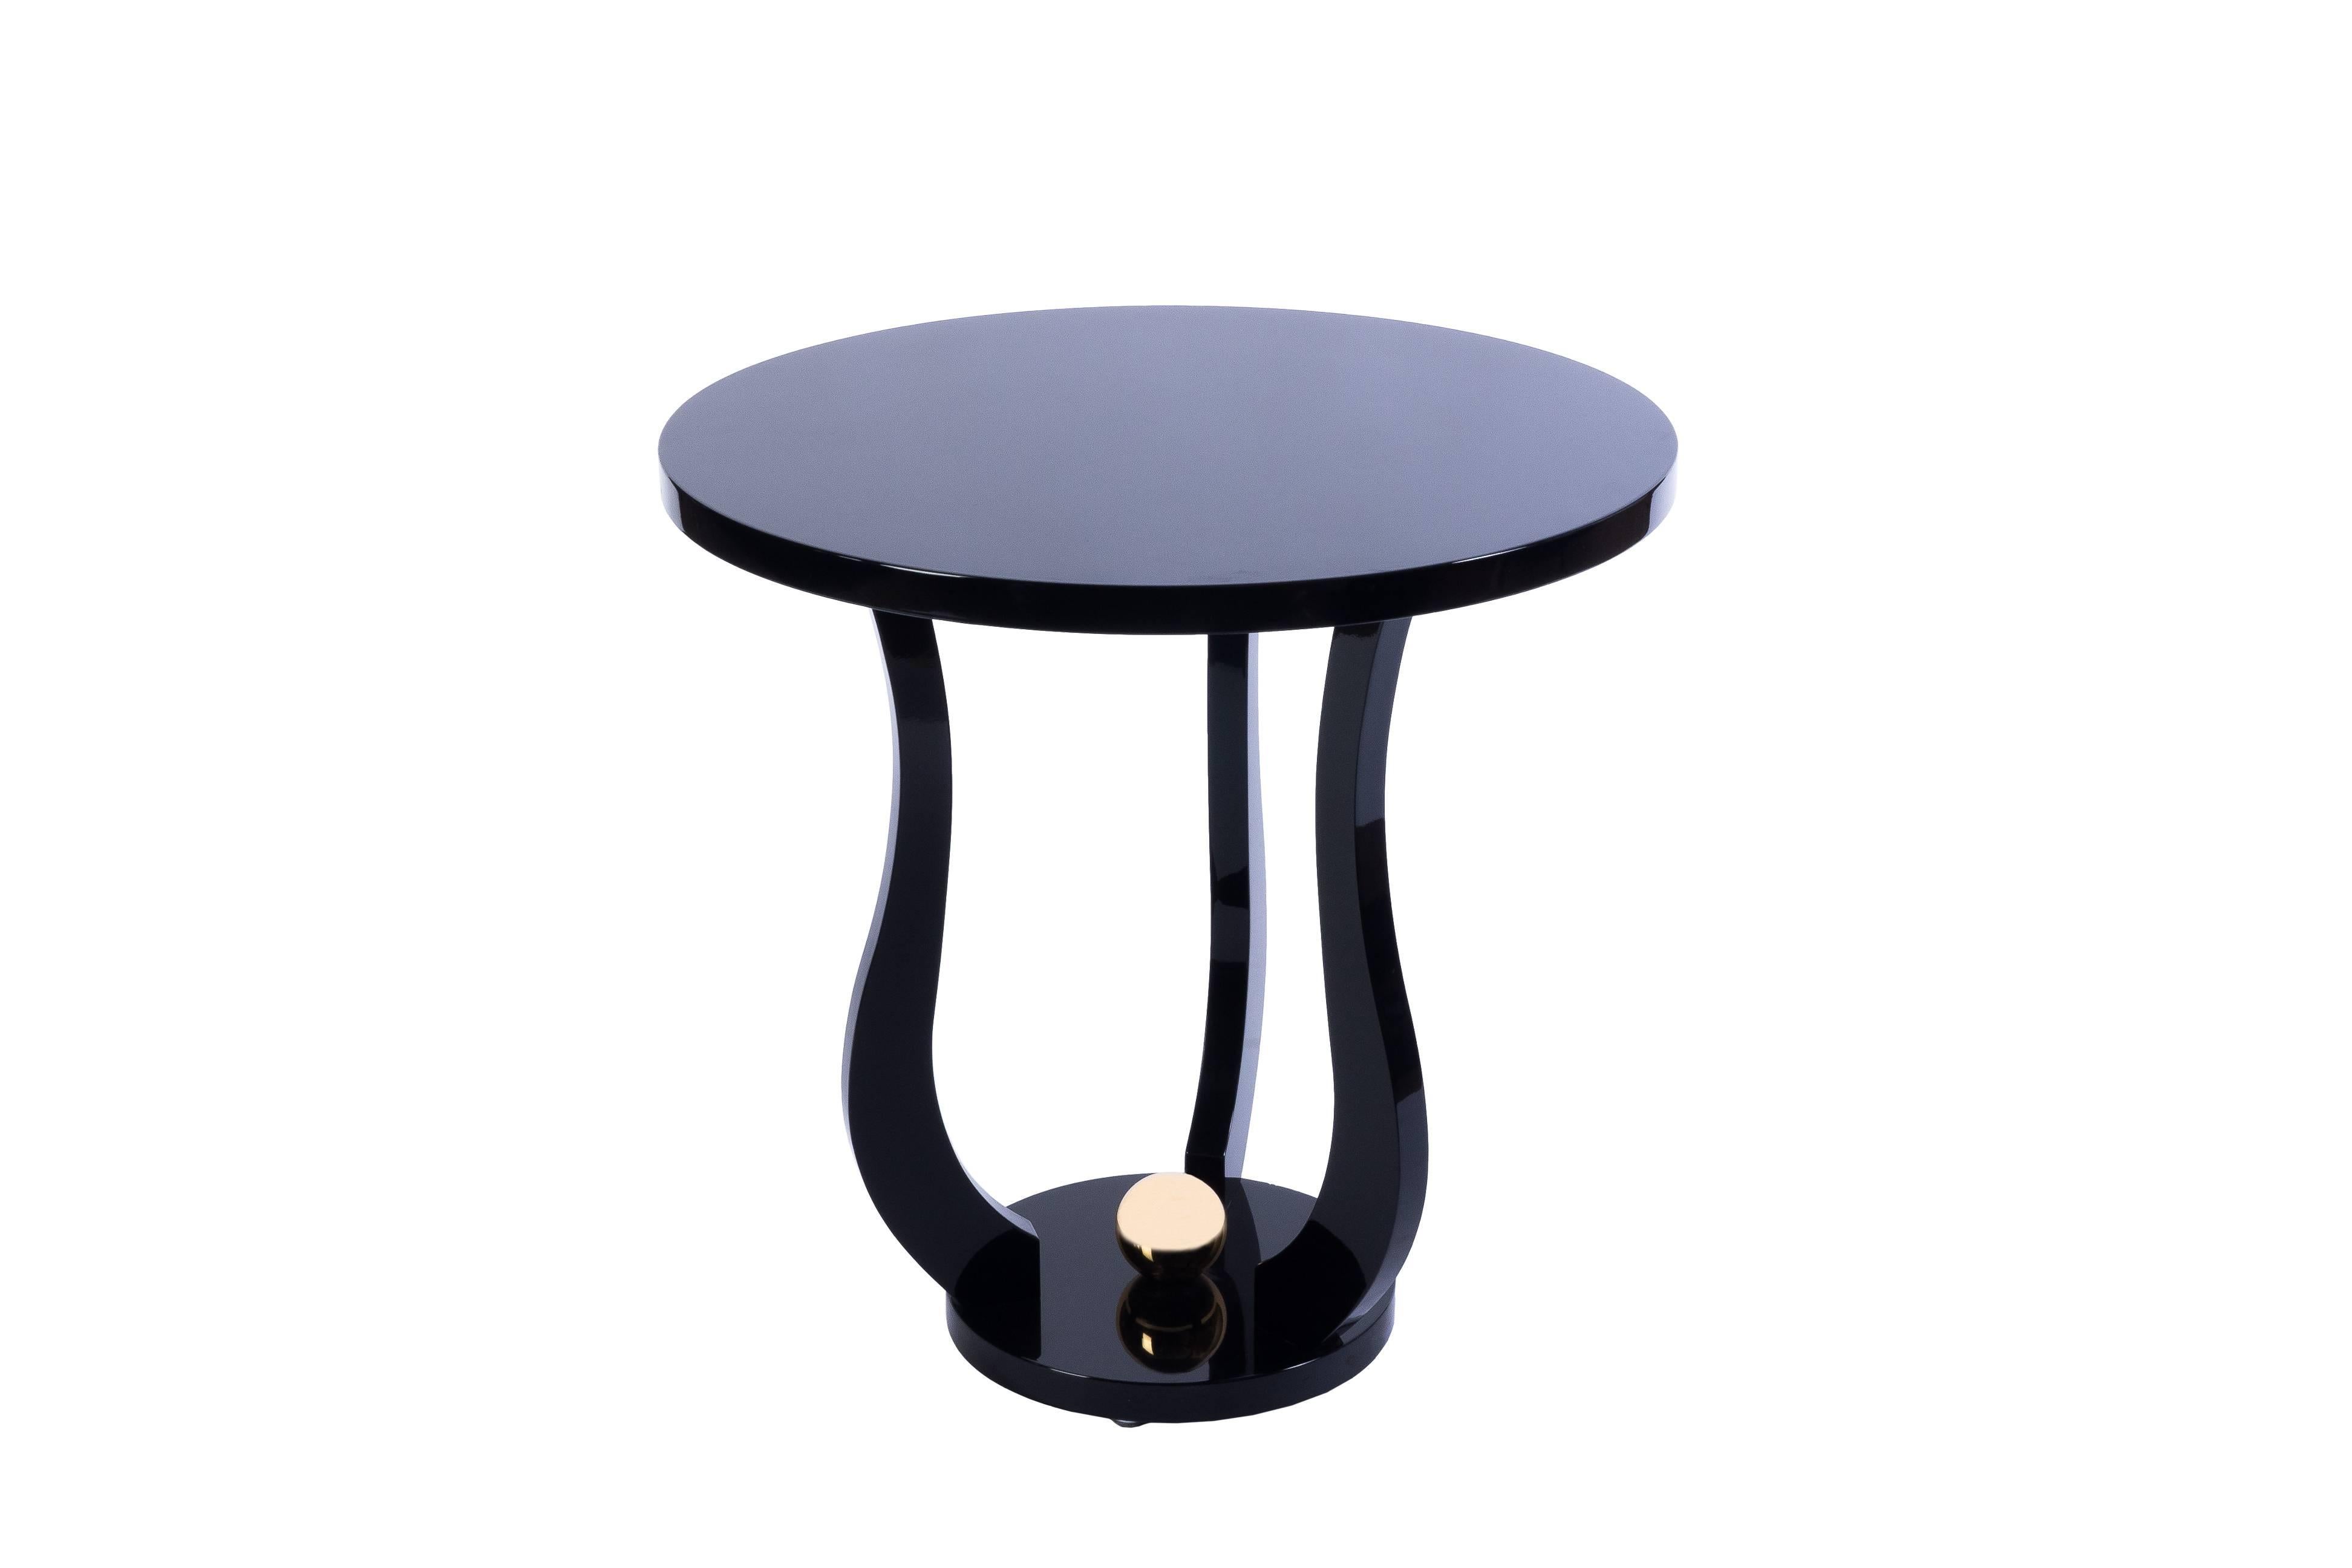 This gorgeous French Art Deco round side table features a tulip shape design in piano black lacquer with a decorative polished brass sphere on the base.